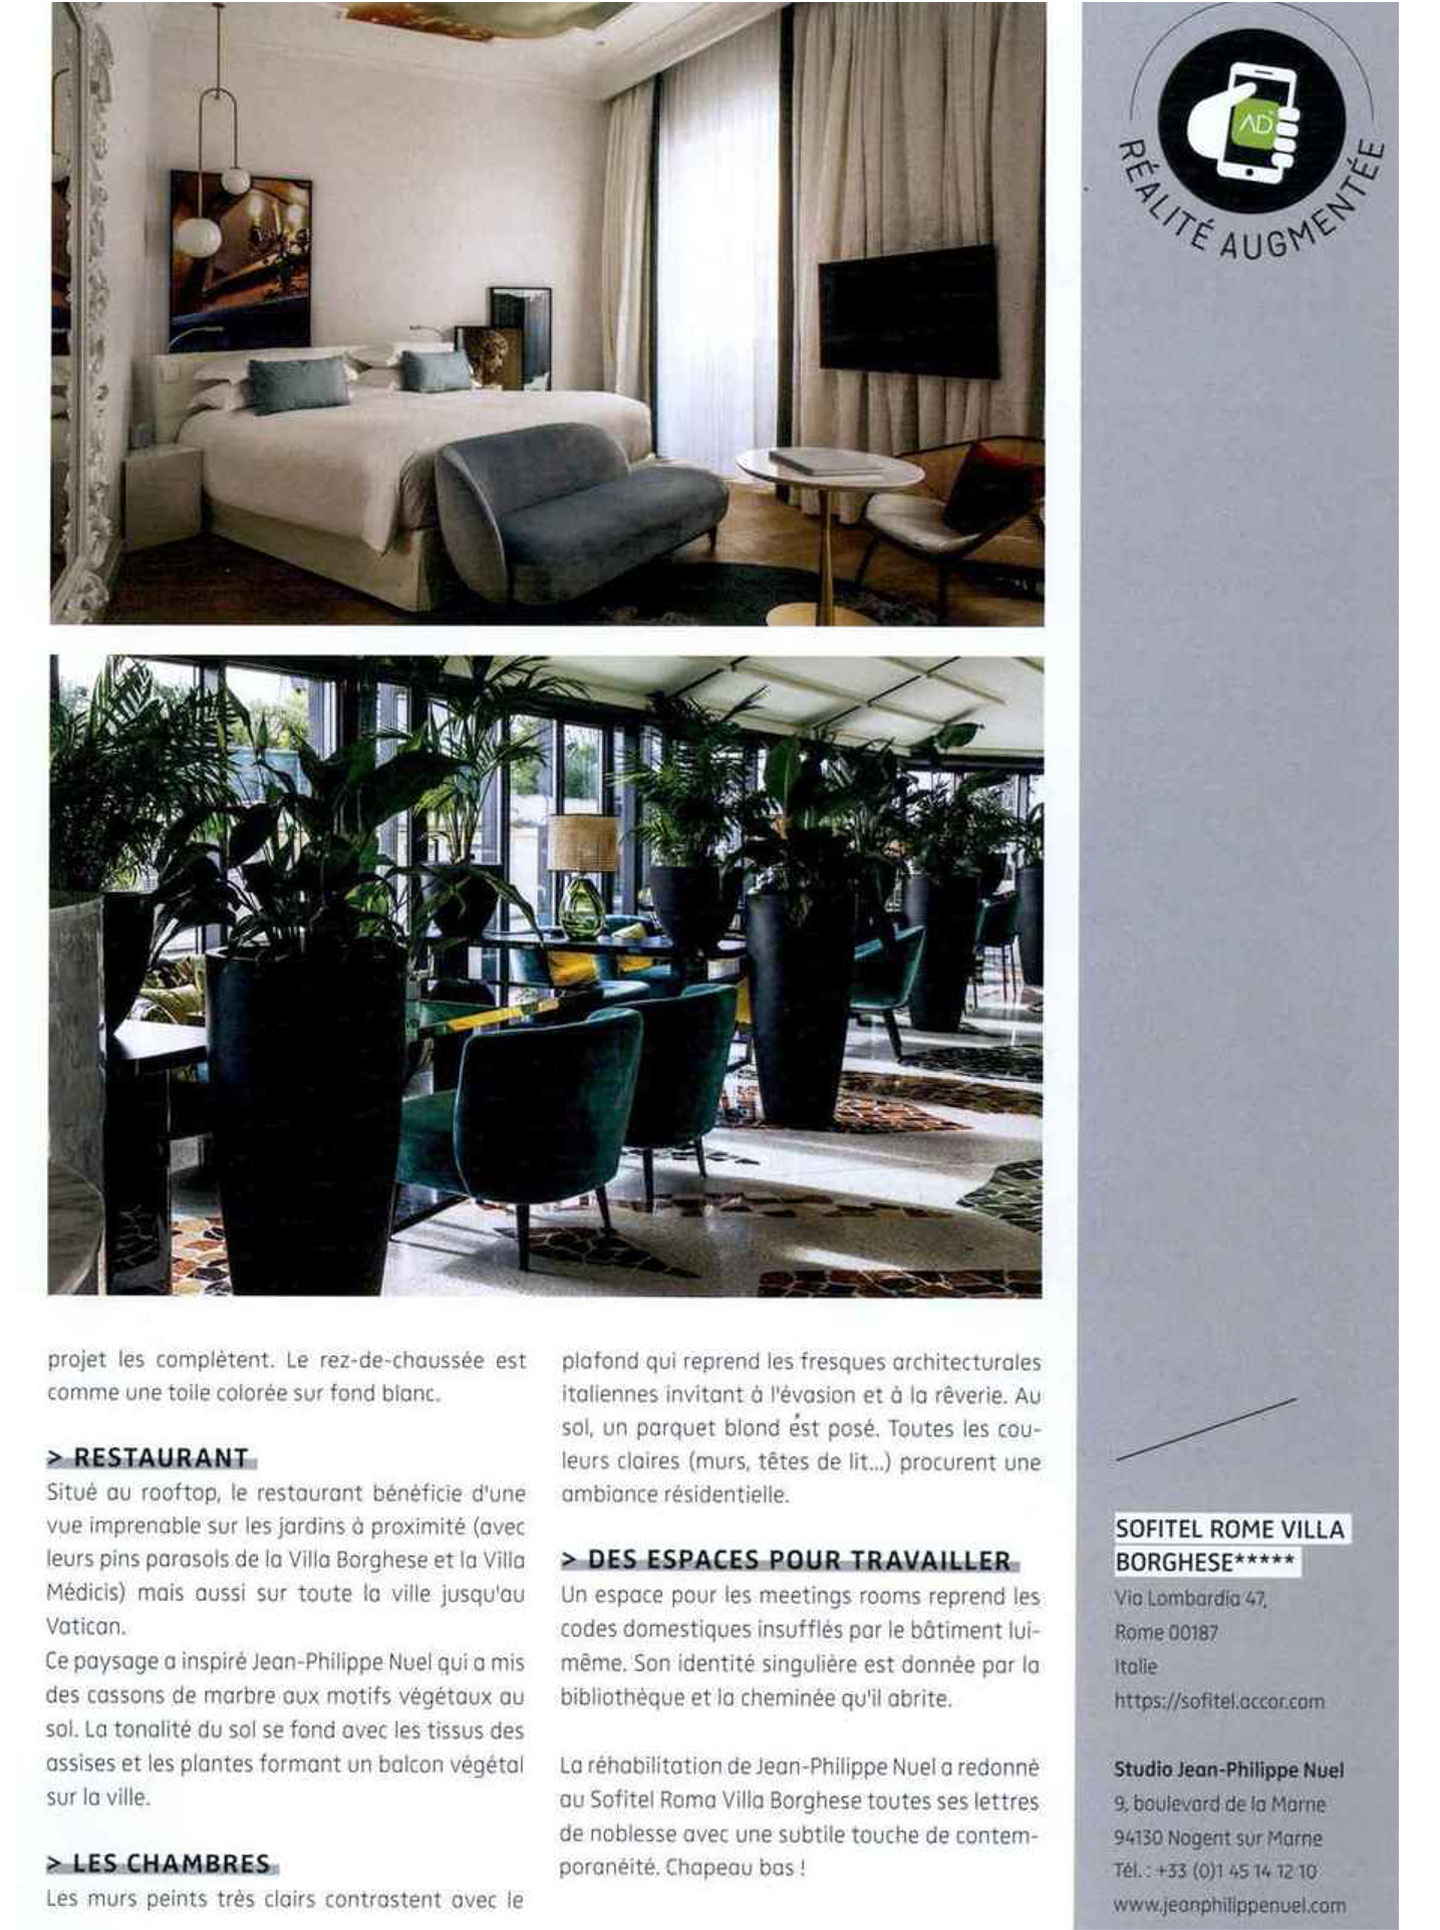 Article on the Sofitel Rome Villa Borghese realized by the studio jean-Philippe Nuel in the magazine nda, new lifestyle hotel, luxury interior design, luxury hotel in italy